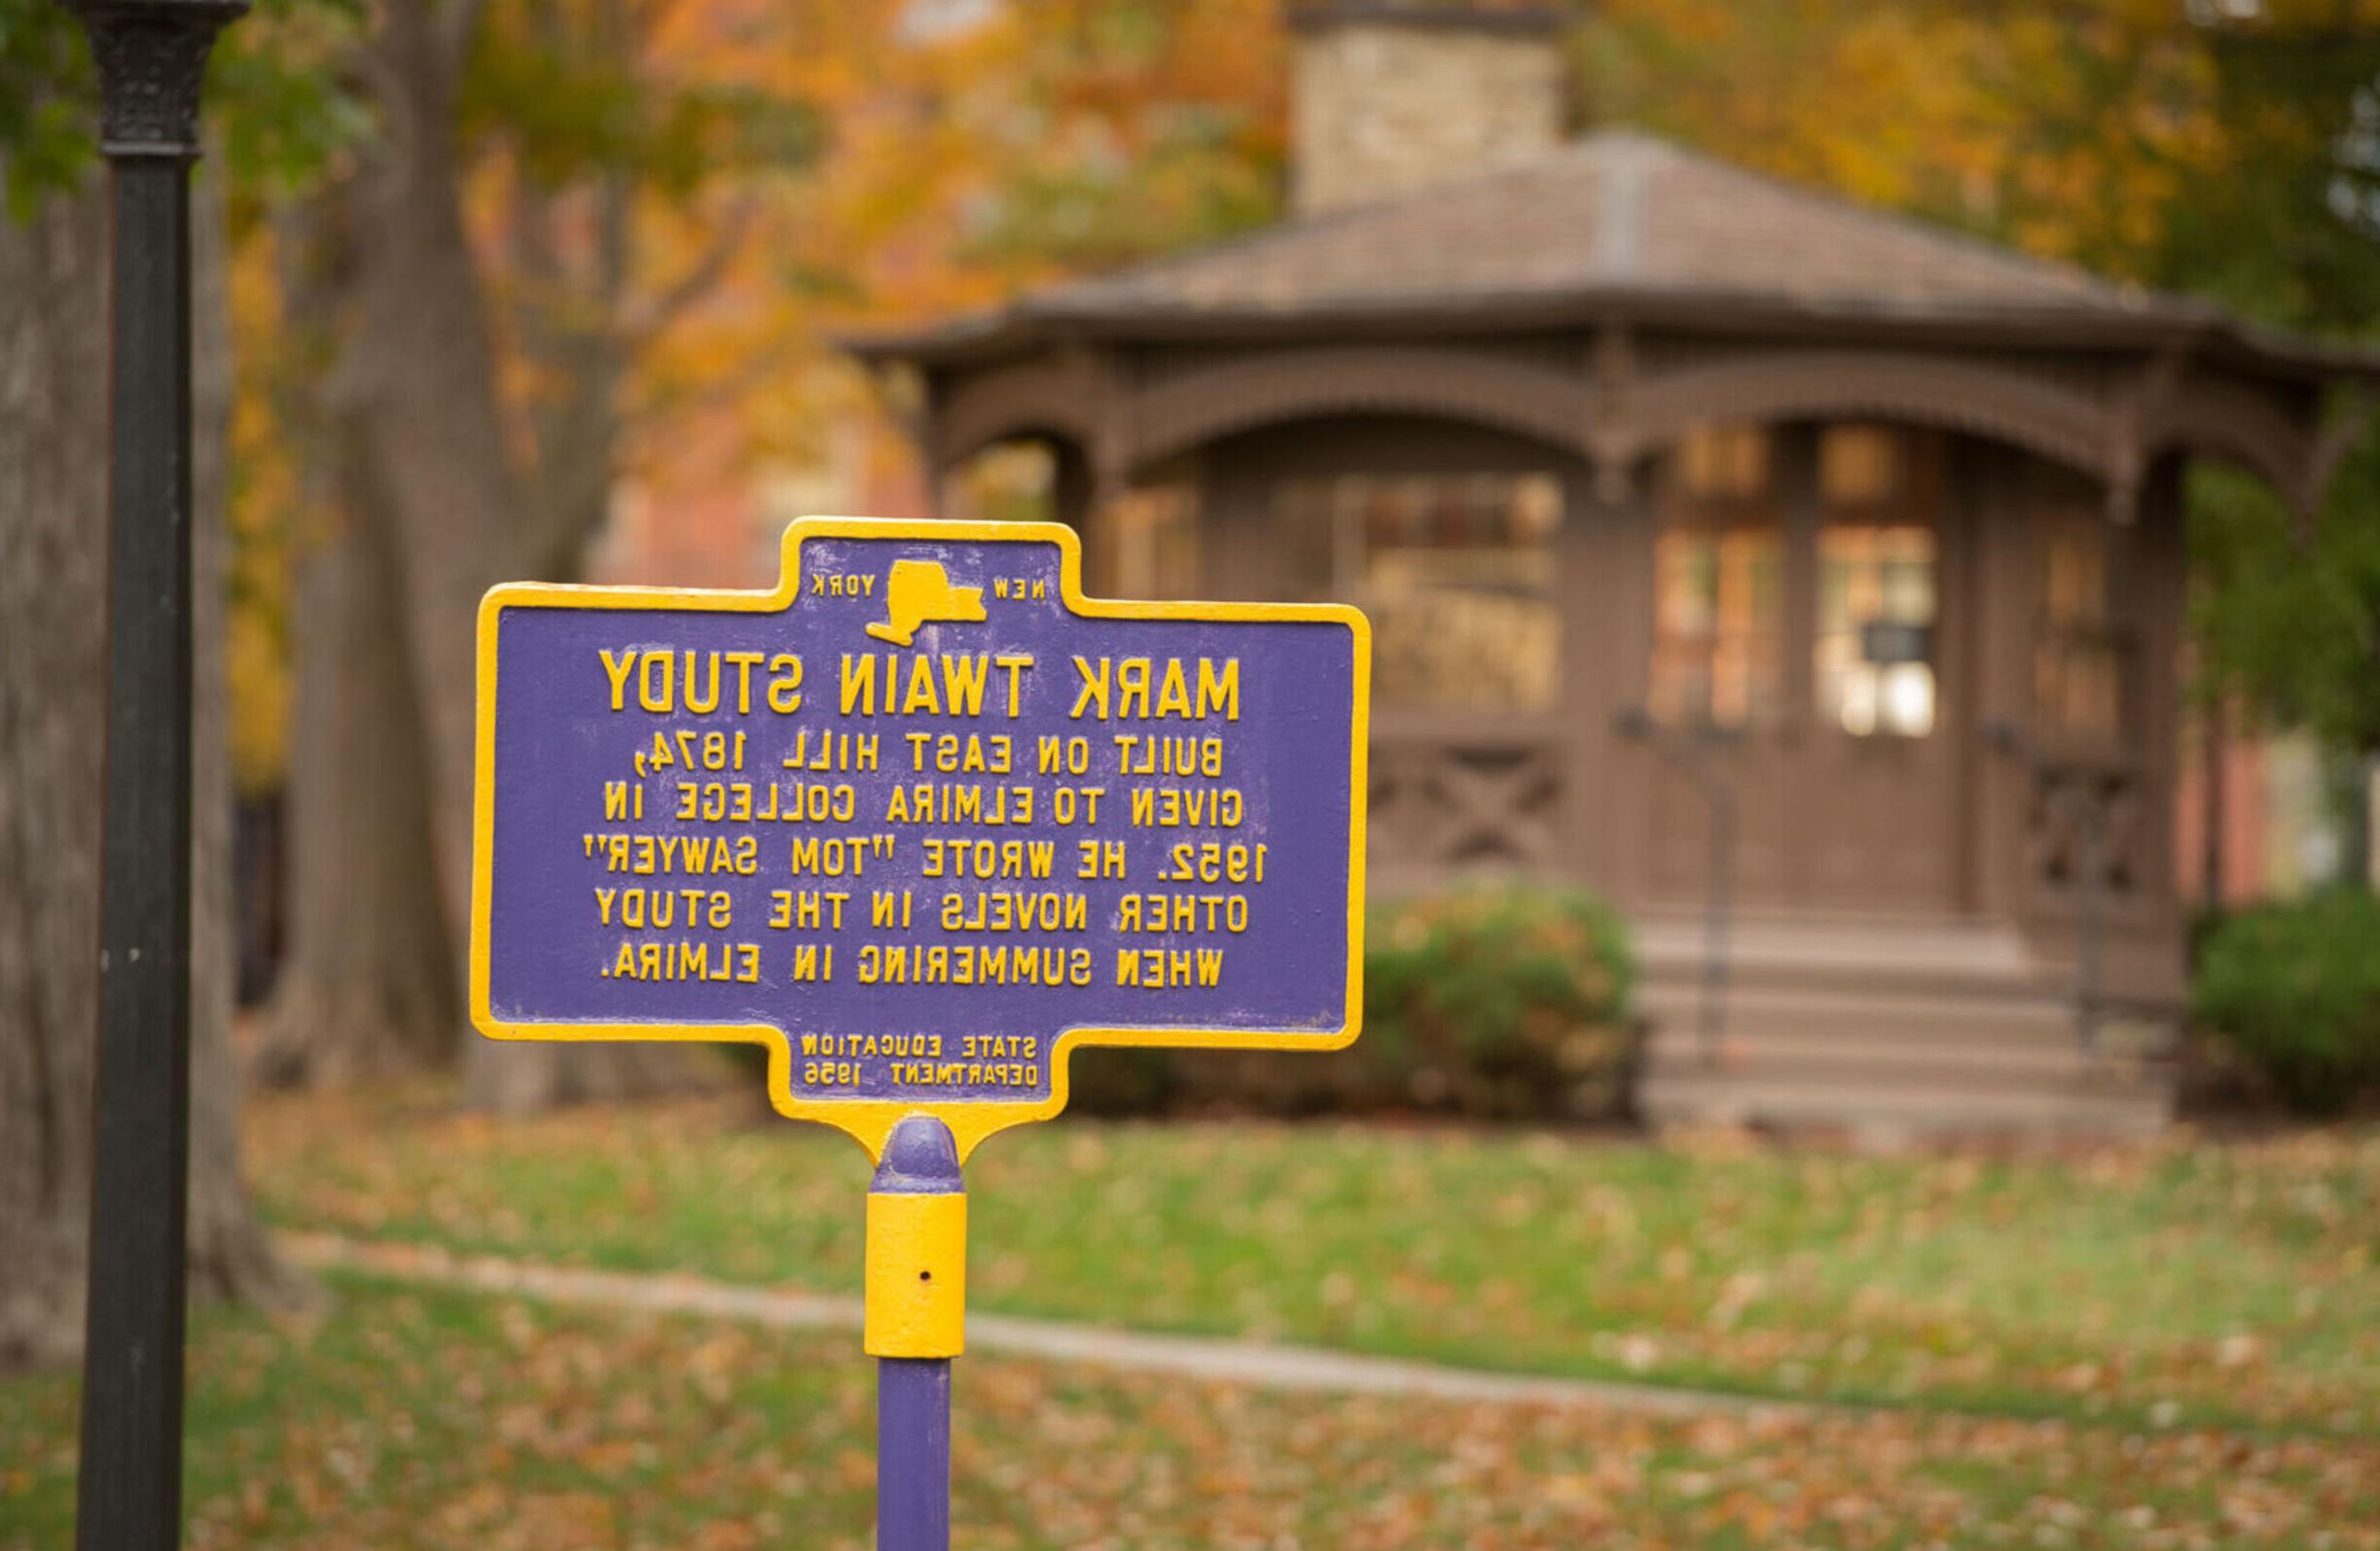 A historical marker in front of the Mark Twain Study on the Elmira College campus